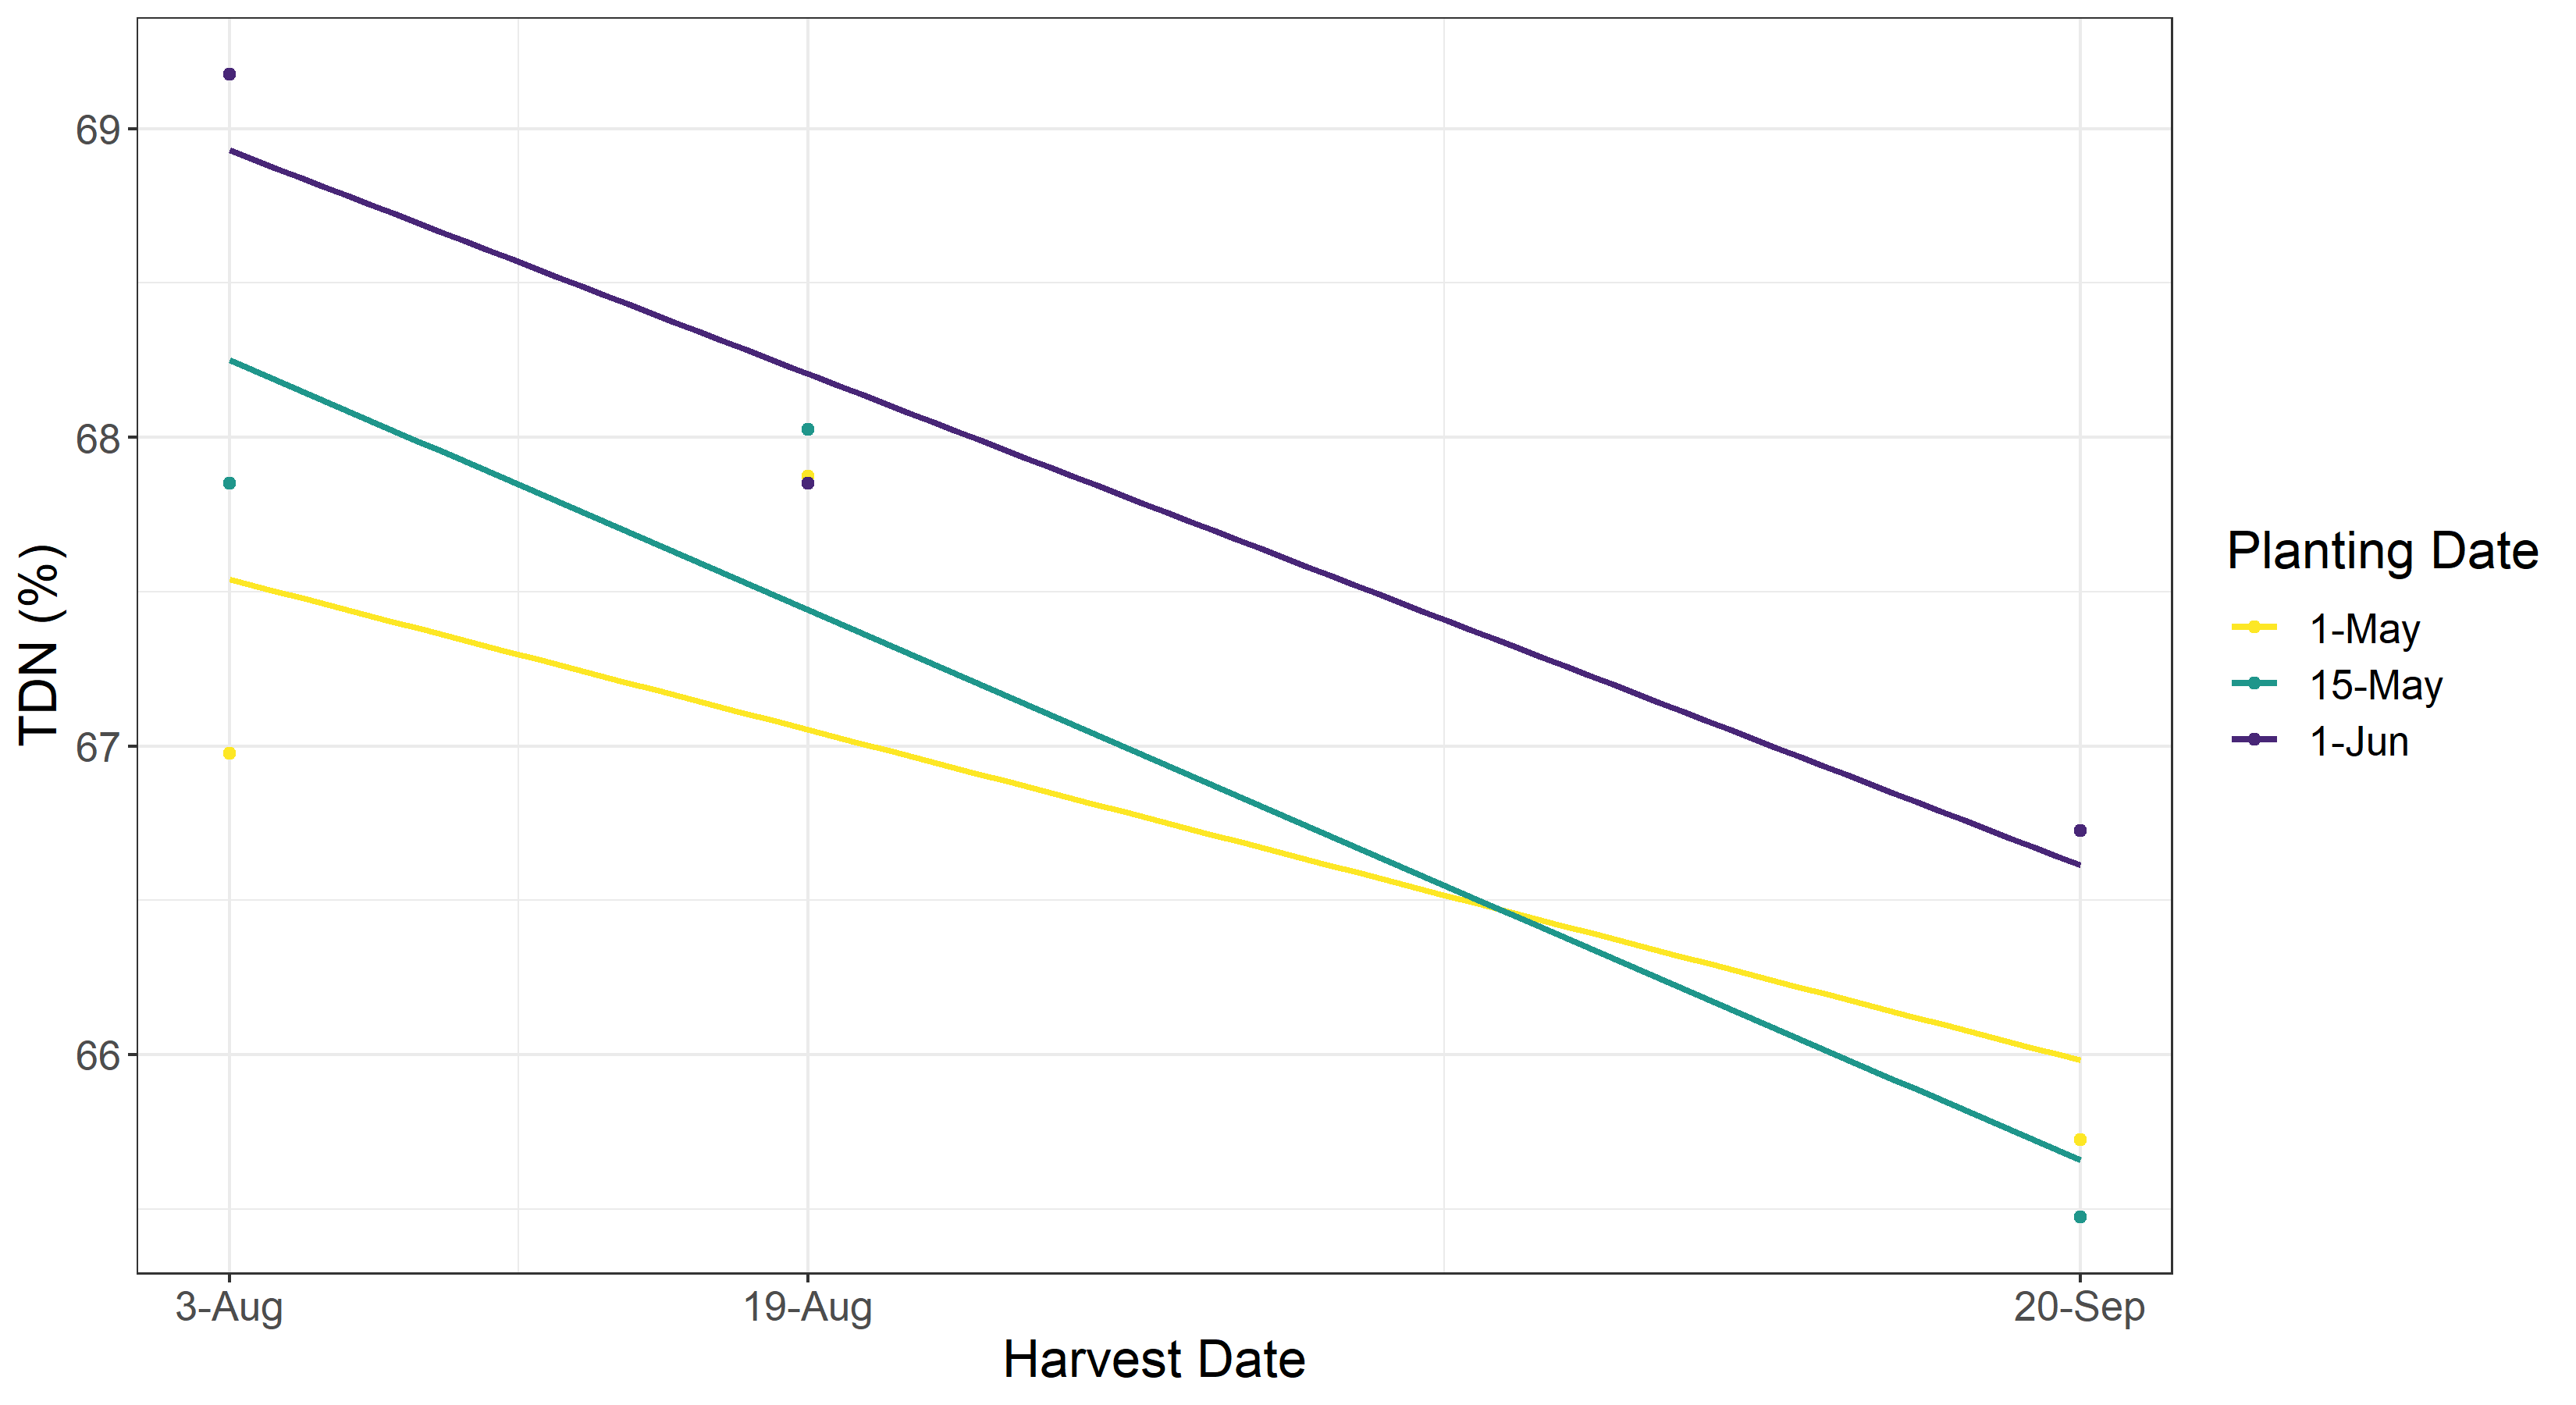 Linear model showing the total digestable nutrients based on planting date over the harvest date